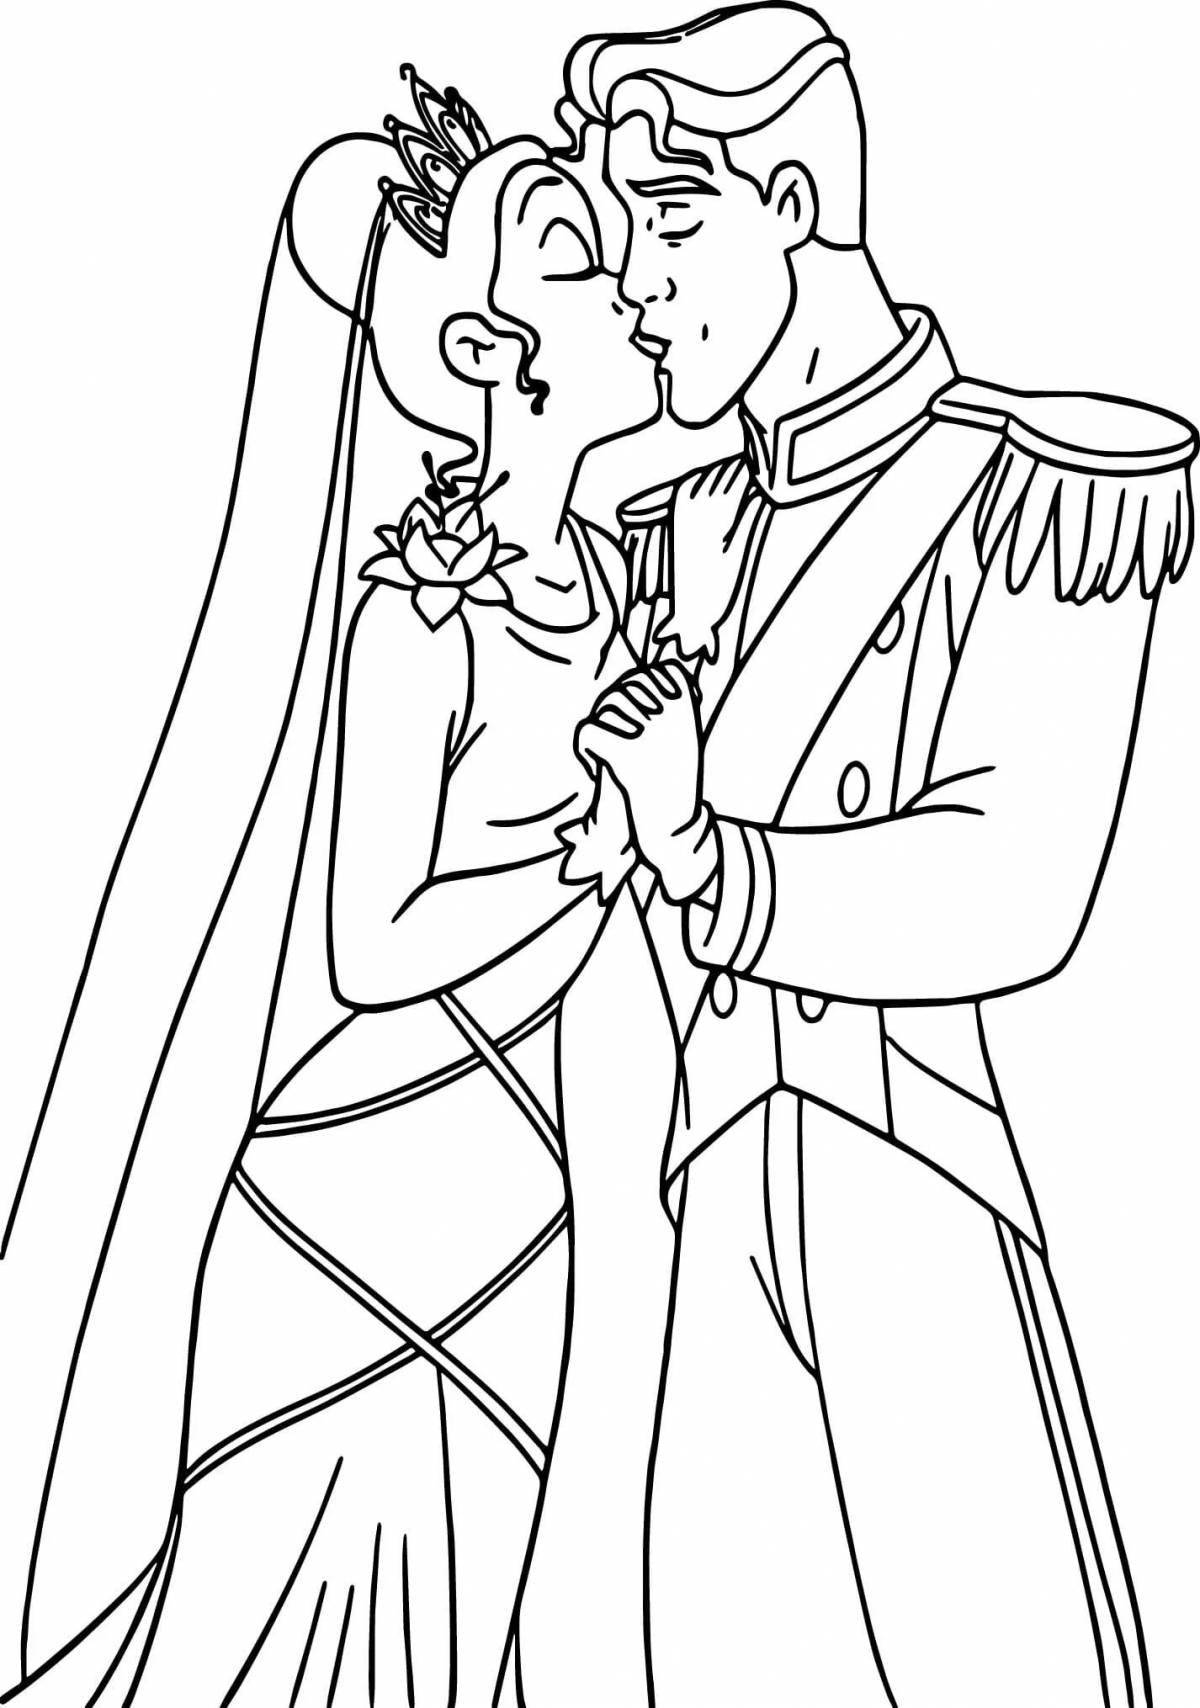 Coloring book shining king and queen